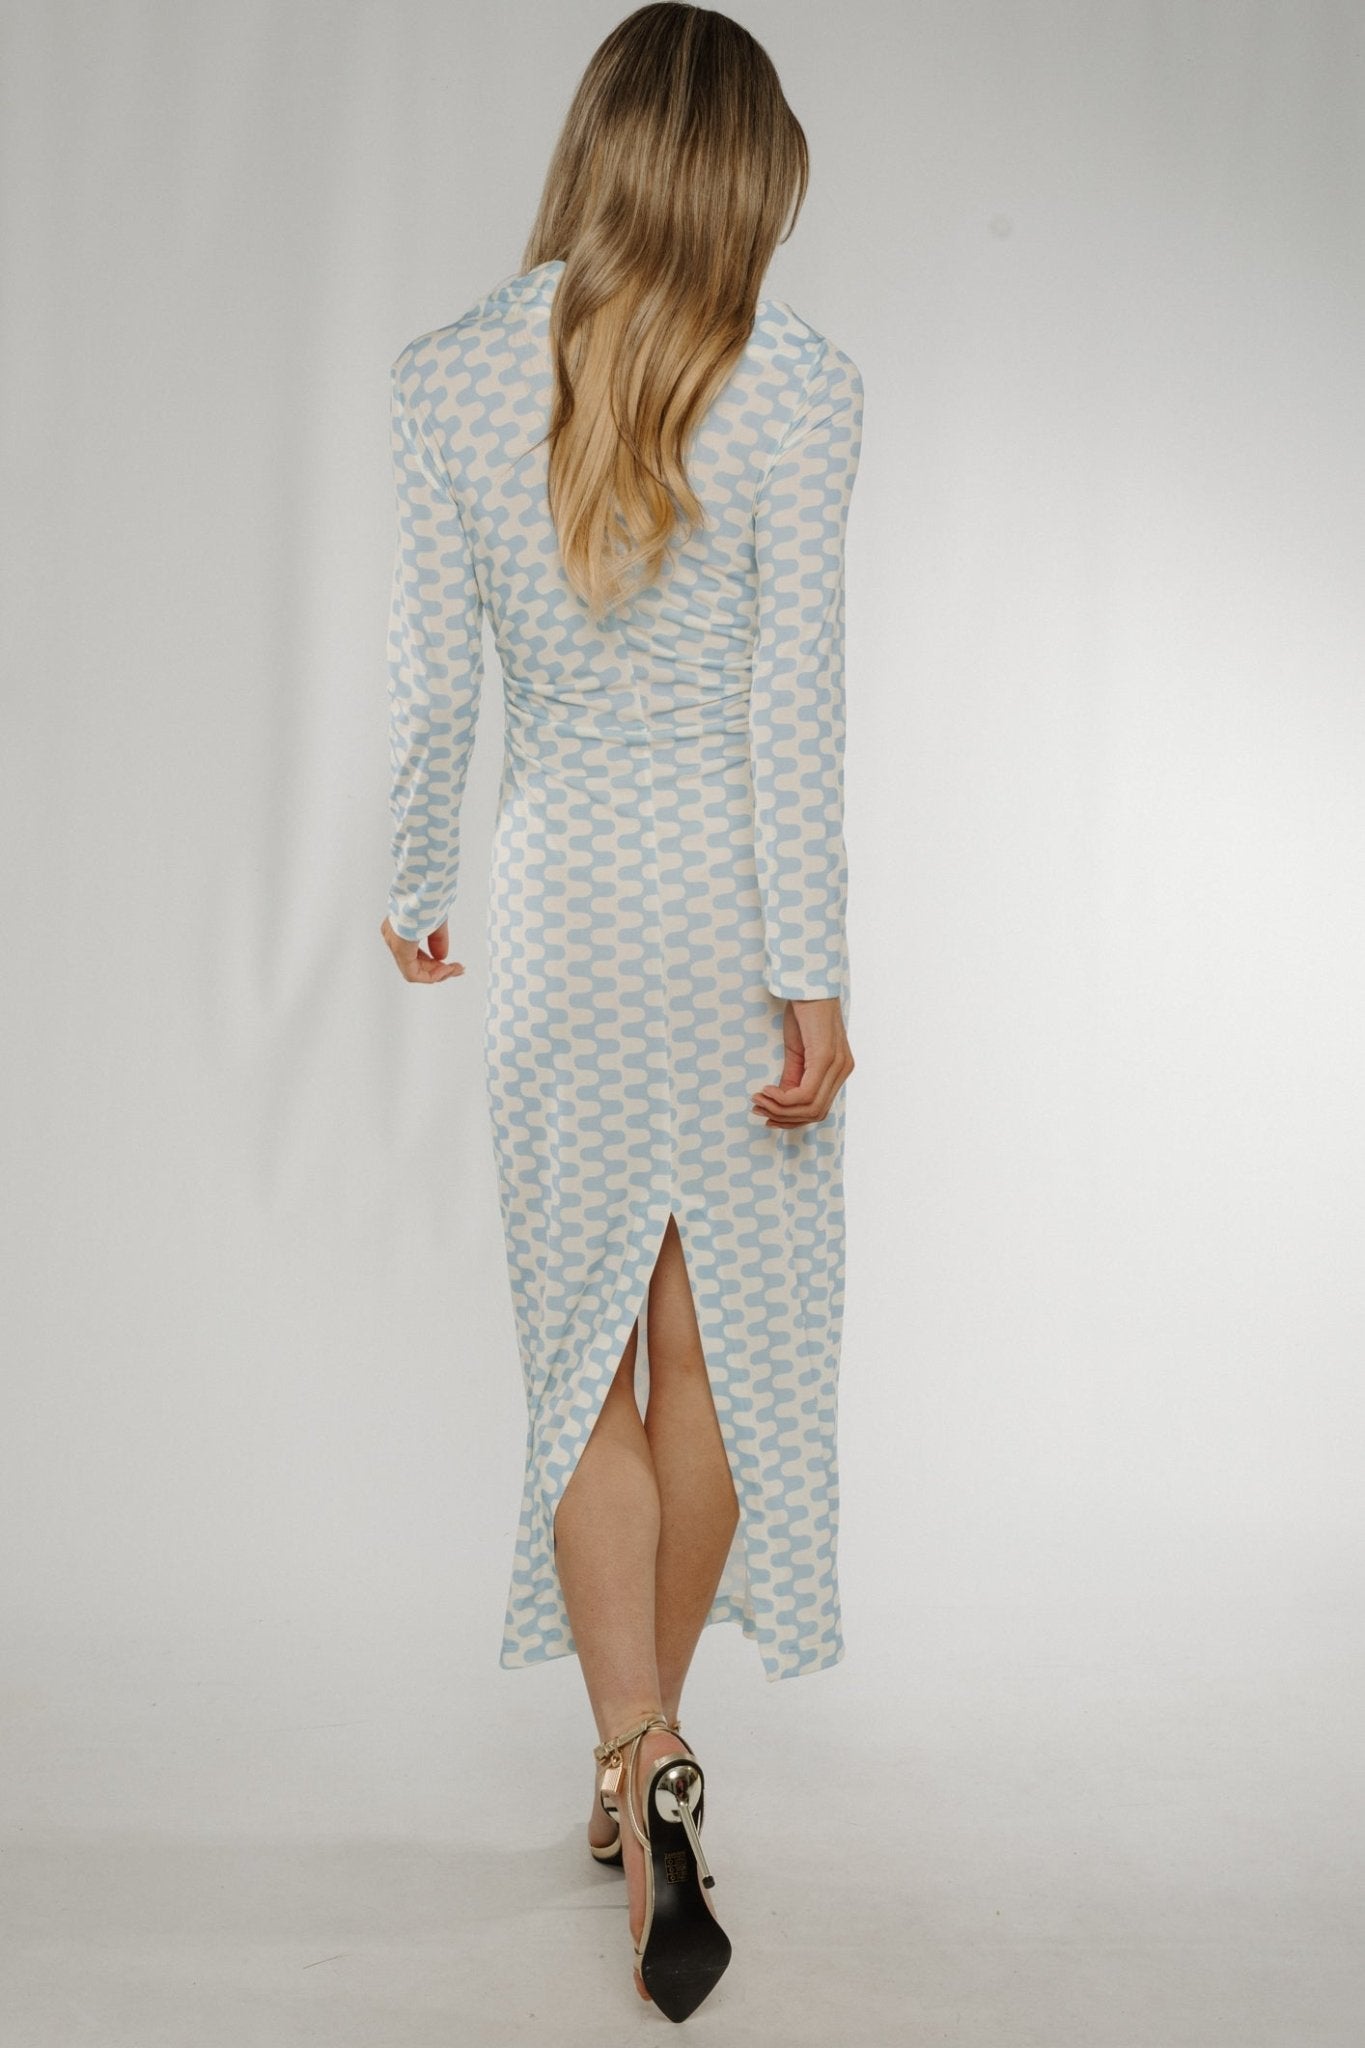 Lexi High Neck Printed Dress In Blue & White - The Walk in Wardrobe